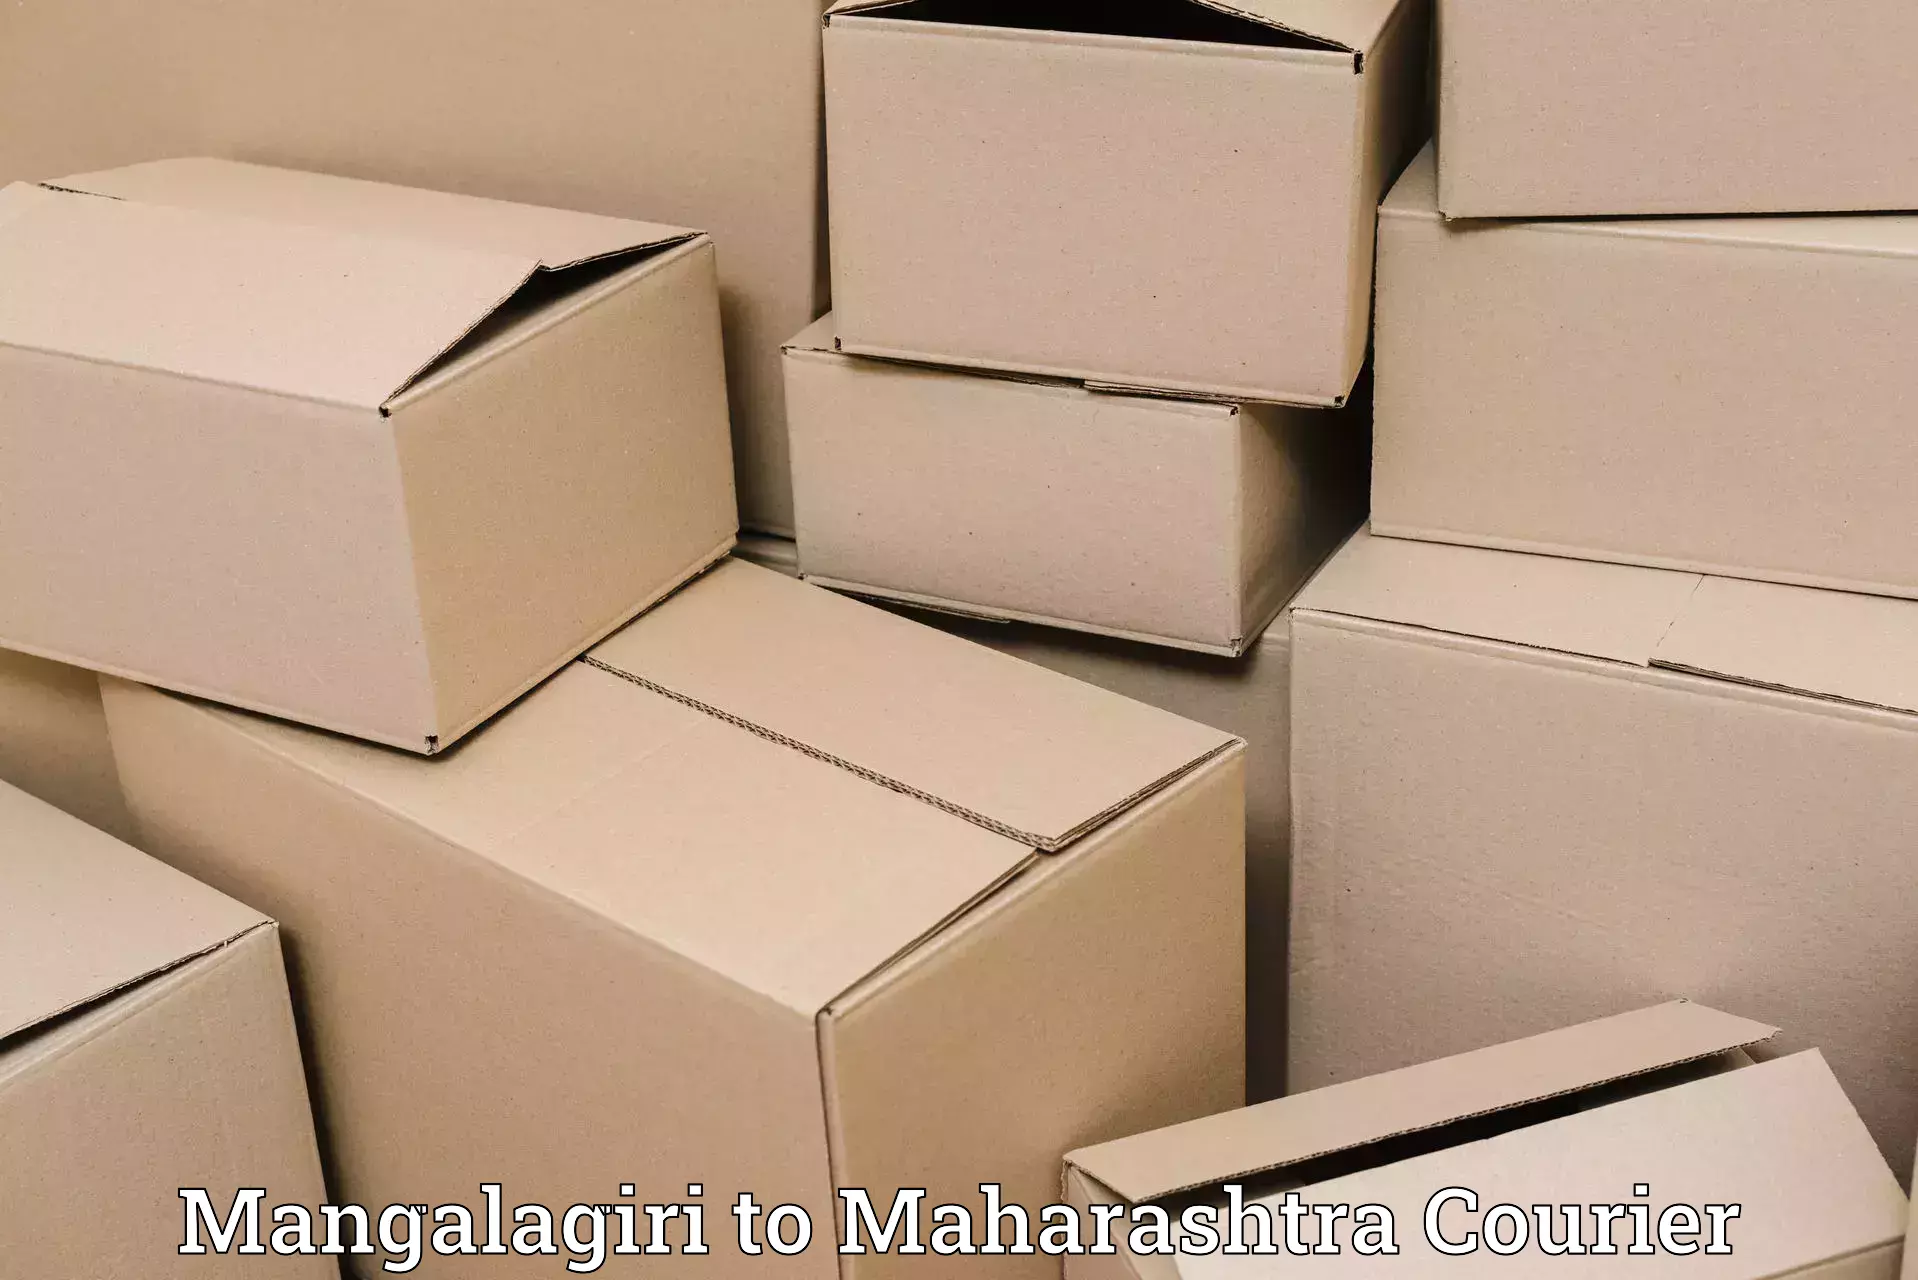 Full-service courier options Mangalagiri to Ahmednagar